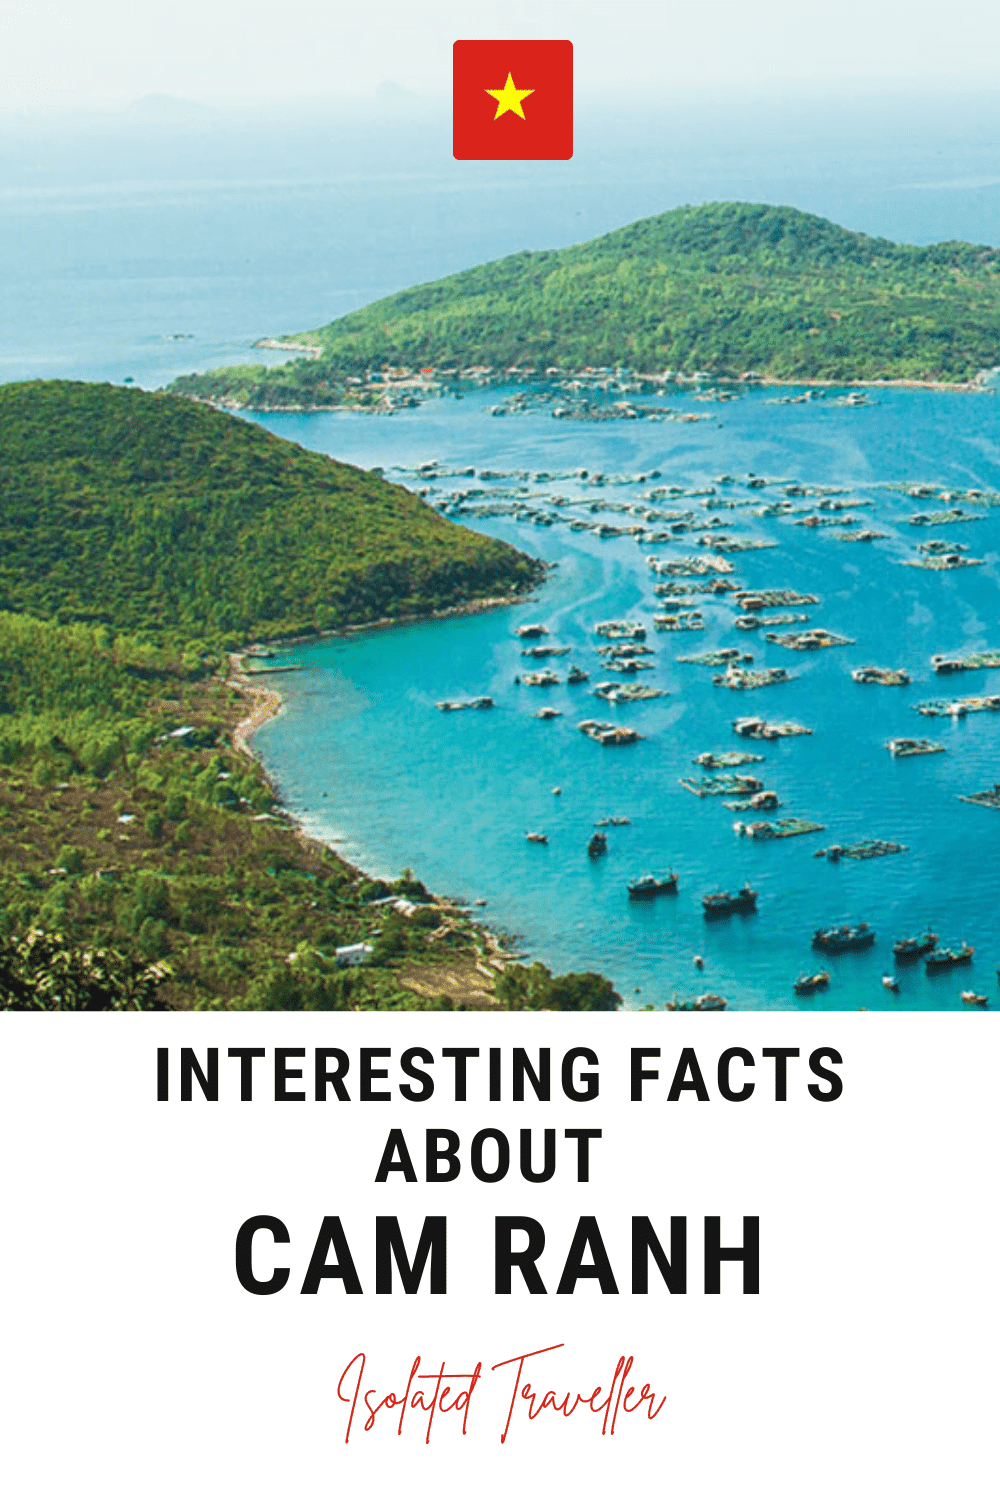 Facts About Cam Ranh